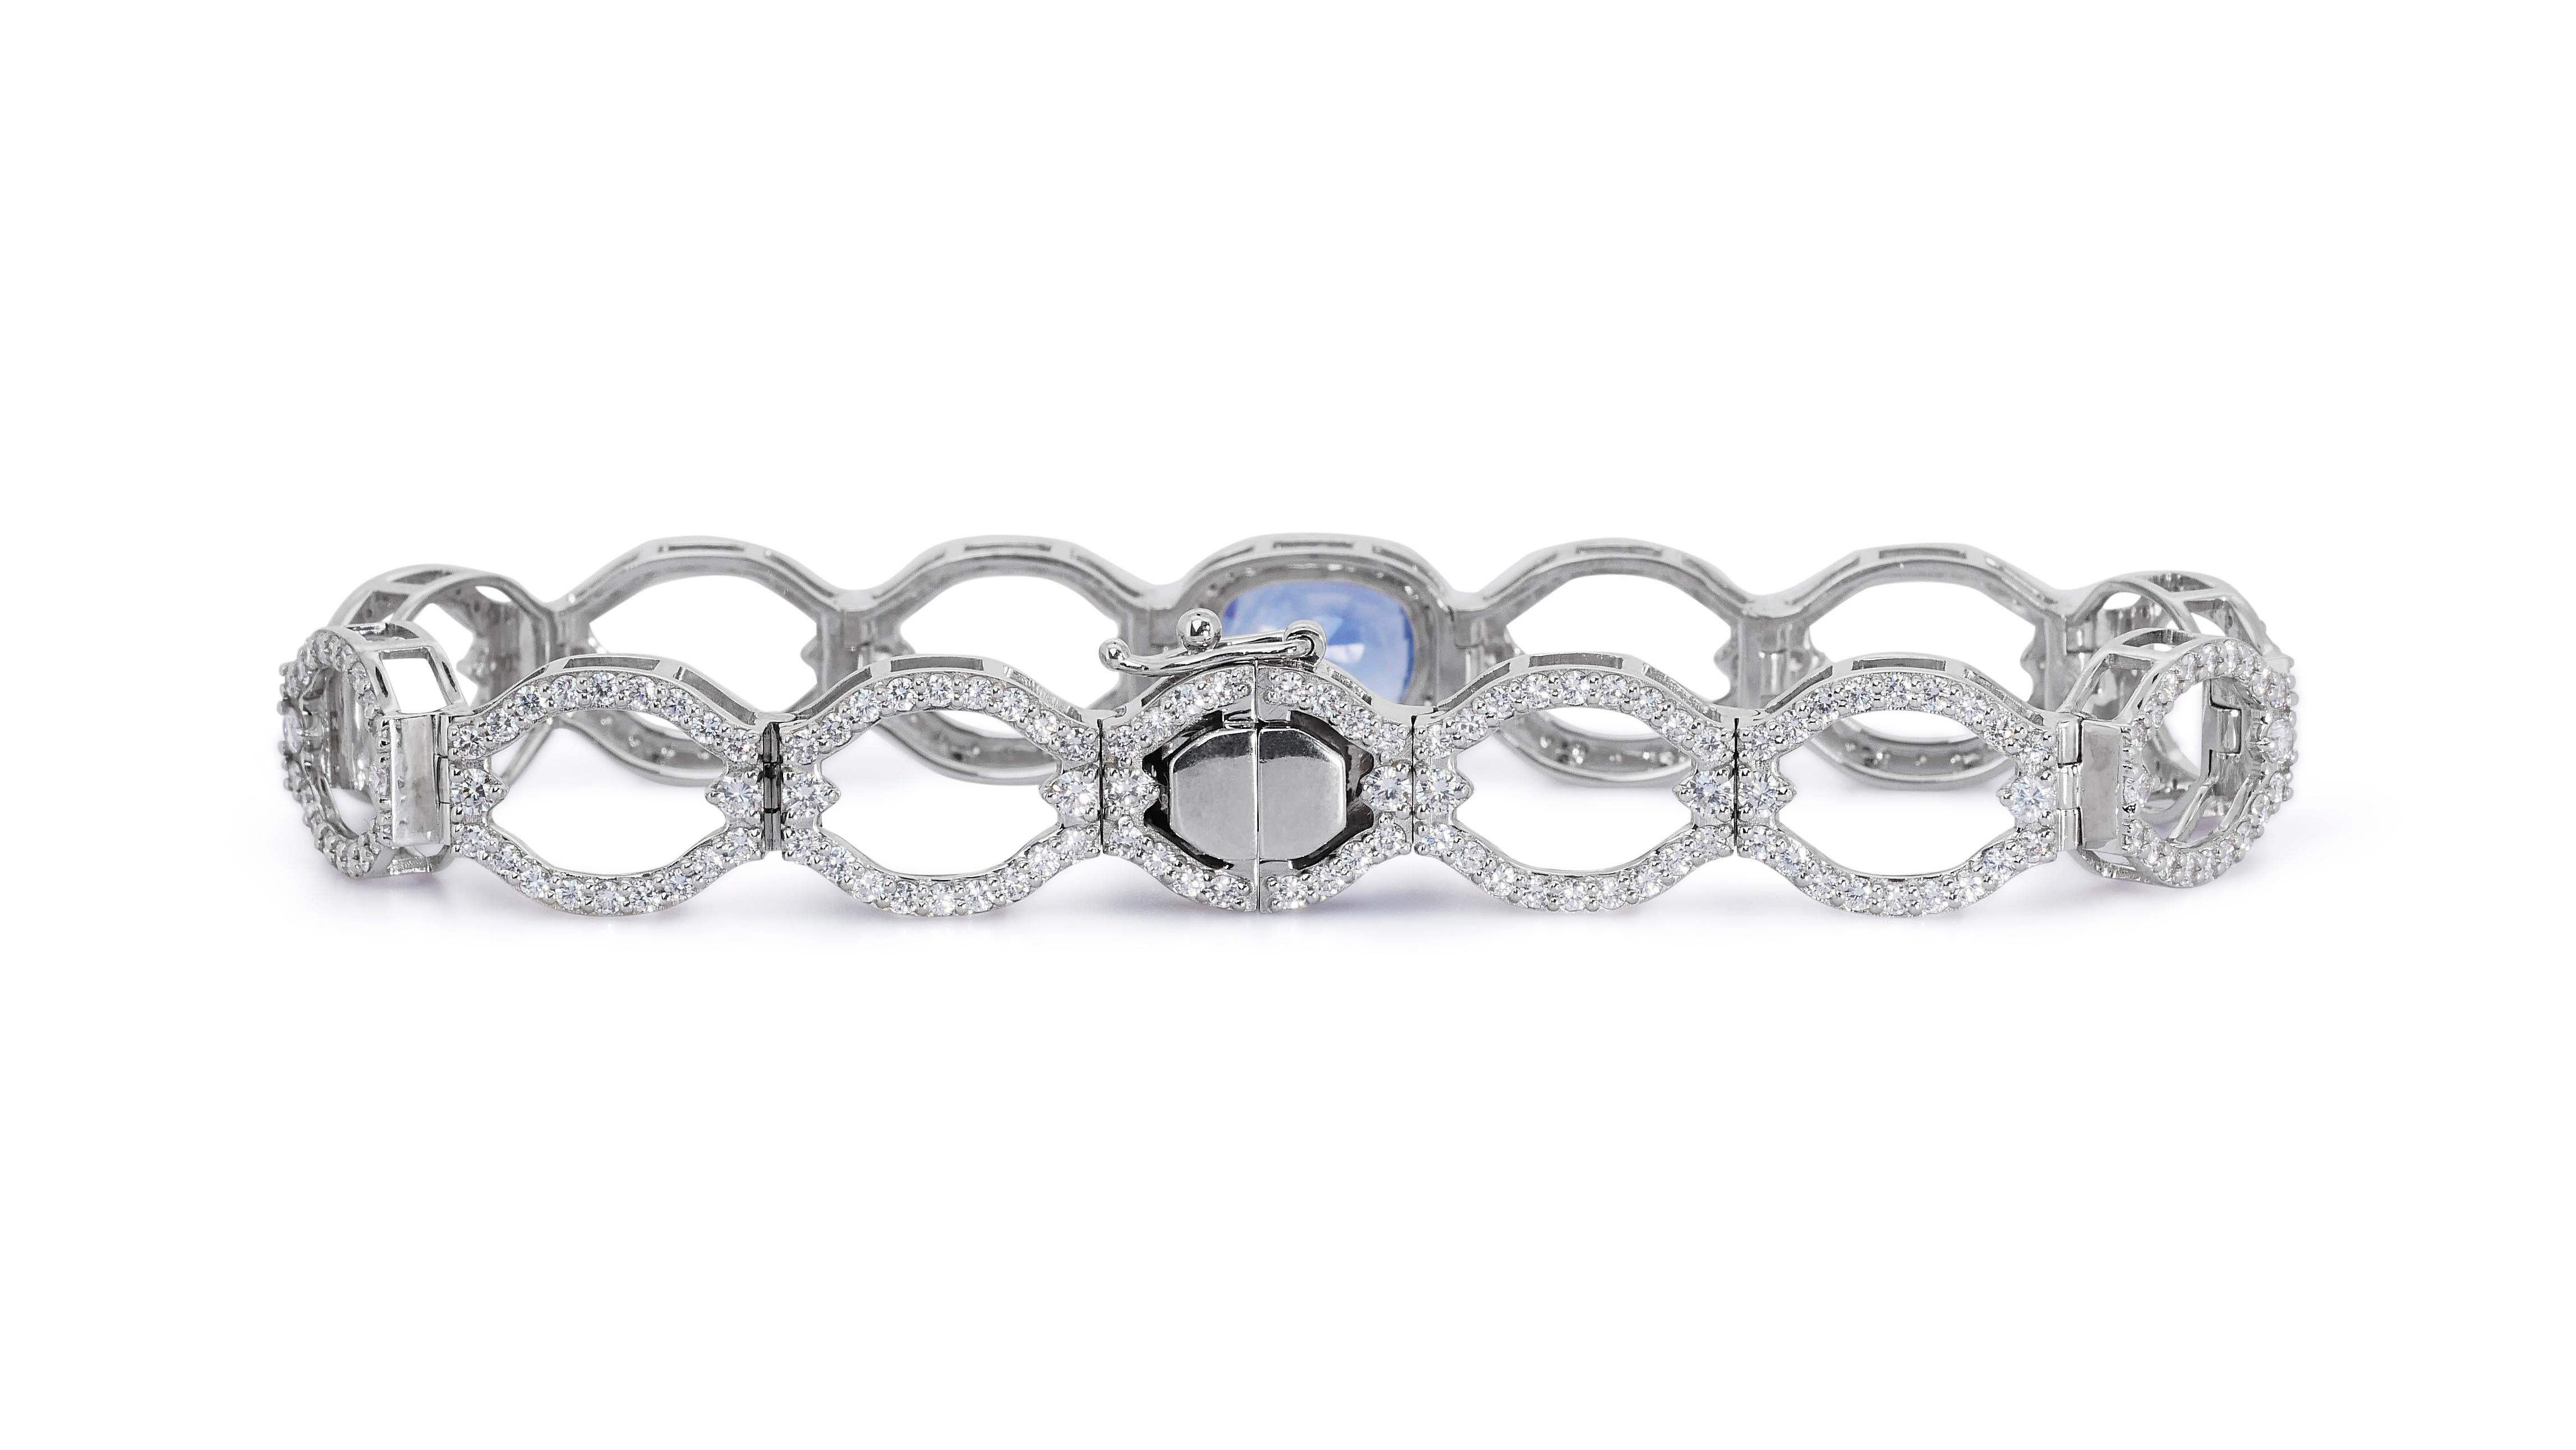 Women's 14k White Gold Bracelet w/ 9.72ct Natural Sapphire and Natural Diamonds GIA Cert For Sale